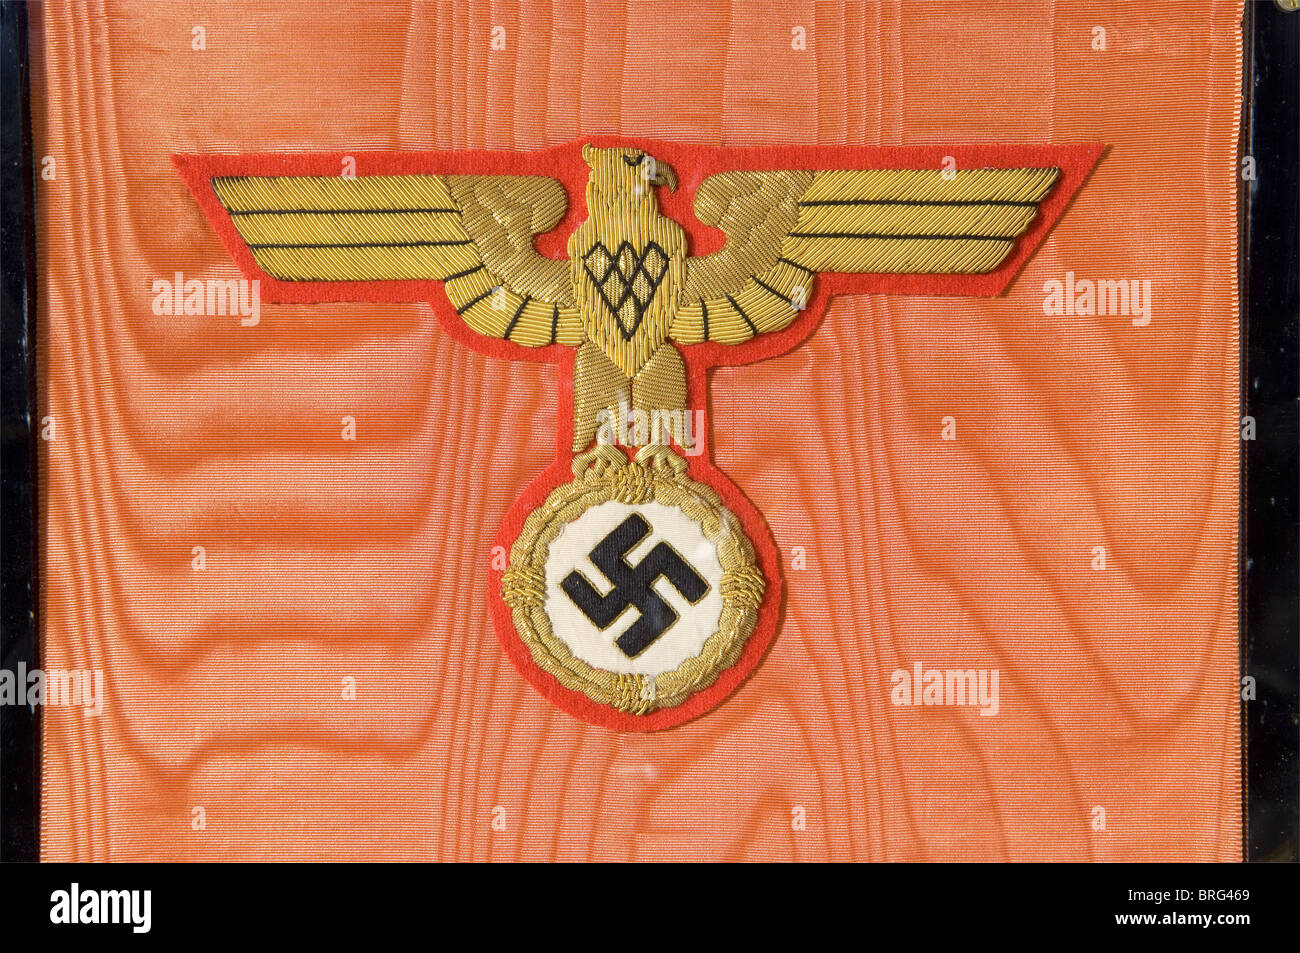 Adolf Hitler - a wreath ribbon for the funeral ceremonies for Reinhard Heydrich,on 9 June 1942 at the Mosaic Hall of the New Reich's Chancellery in Berlin.Red,watered ribbed silk with Hitler's personal heraldic eagle embroidered in gold over the stamped gold inscription.'Der Führer und Oberste Befehlhaber der Wehrmacht'(The Führer and Supreme Commander of the Wehrmacht).The opposite side displays Hitler's personal standard as supreme commander of the Wehrmacht embroidered in gold on silk.A gold fringe along the lower edge.Length ca.110 cm.Outstanding ,Additional-Rights-Clearences-Not Available Stock Photo